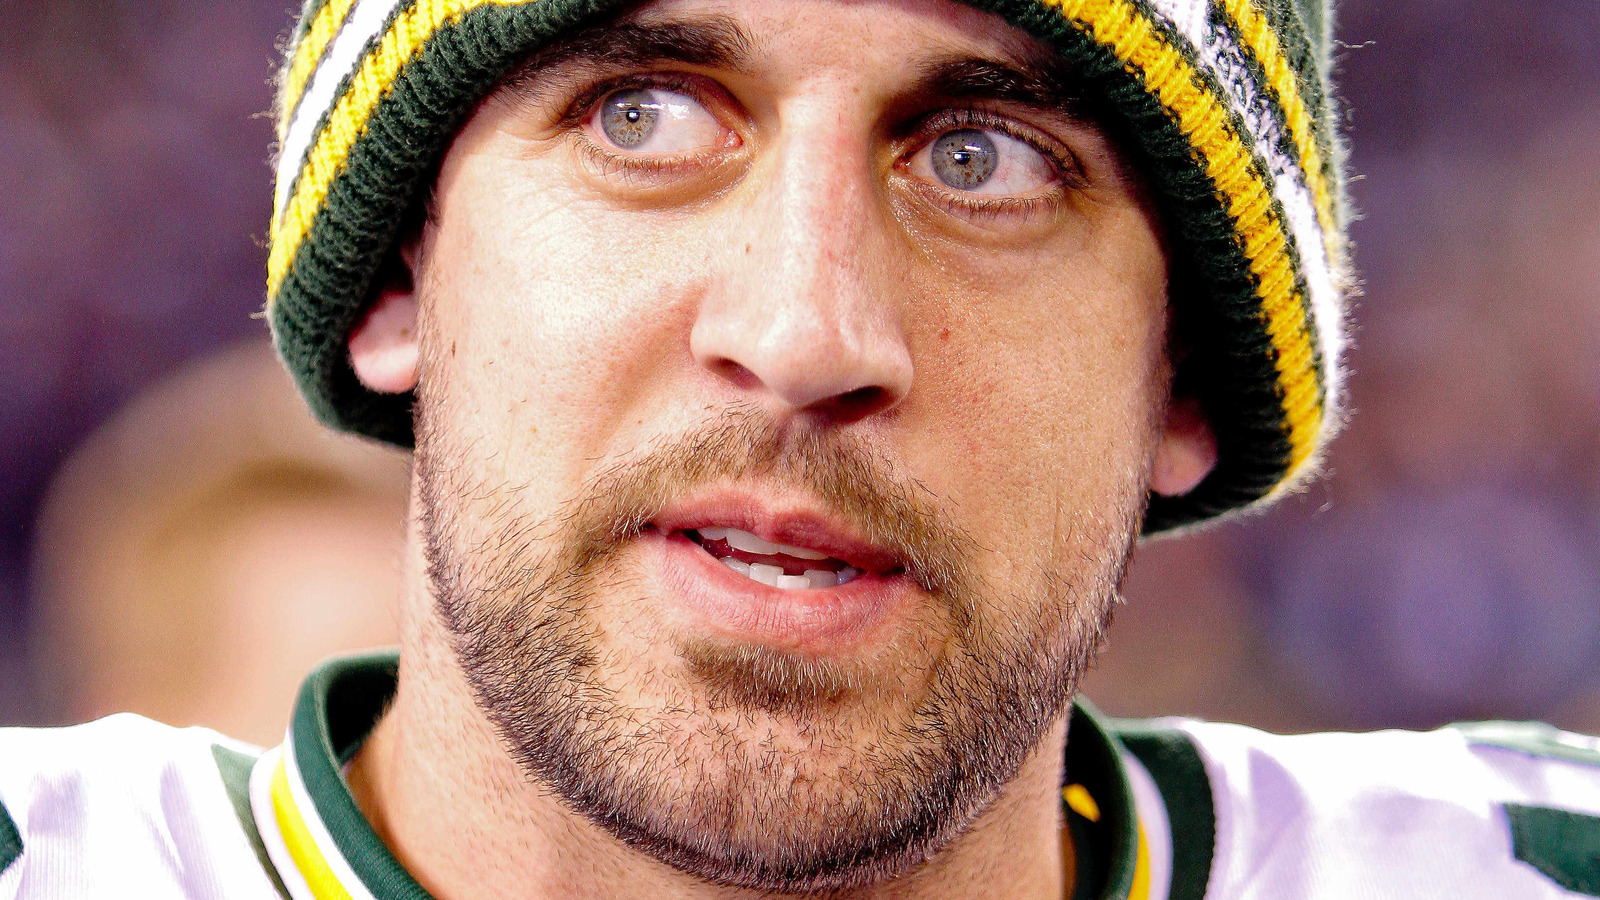 The Life Of Aaron Rodgers: From Childhood To The NFL